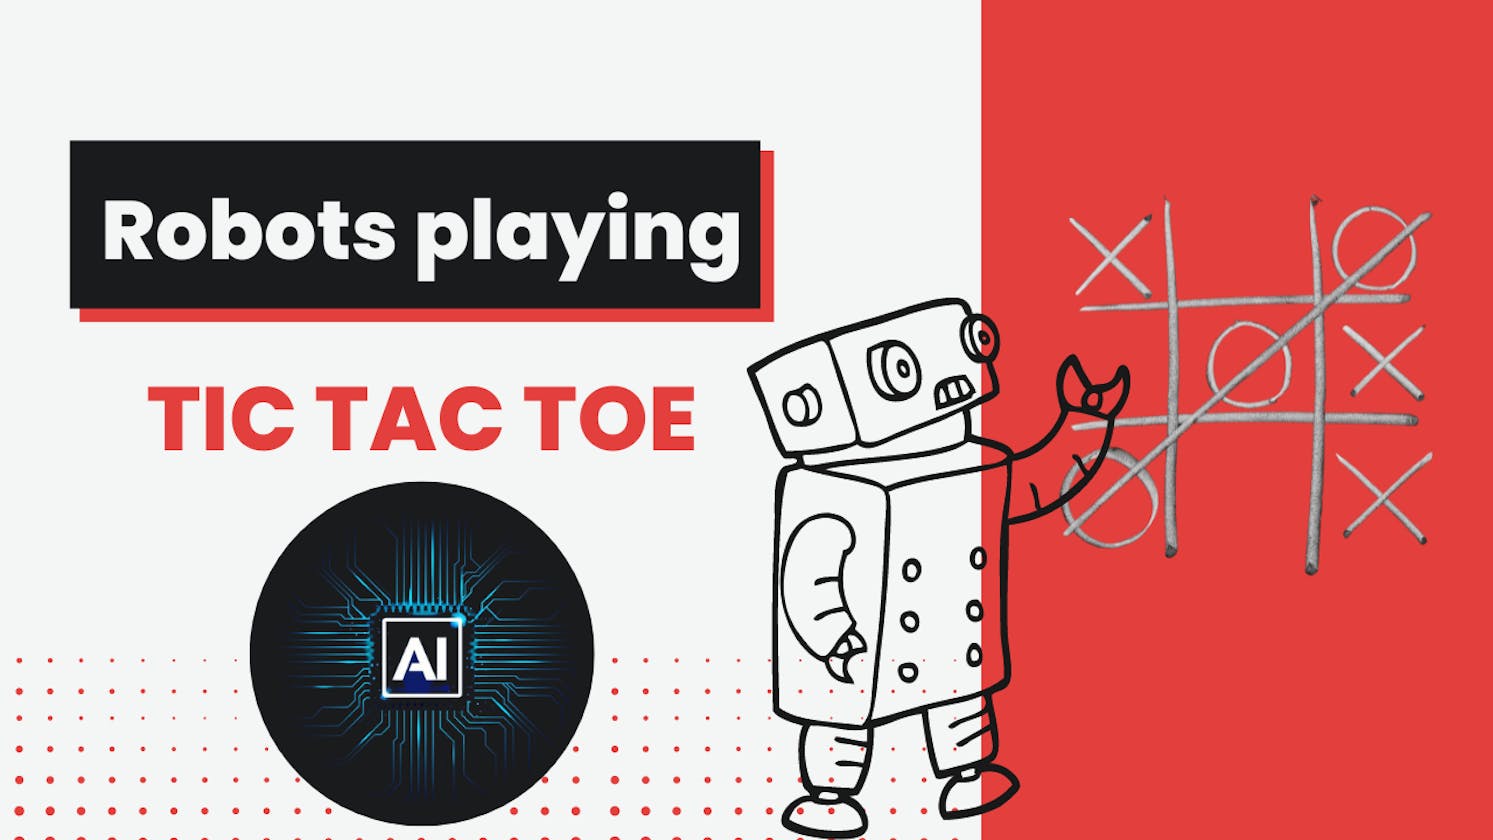 GitHub - frank-quoc/tic-tac-toe: Tic-Tac-Toe command line project for the  basic children's game that will pit the player against a computer.